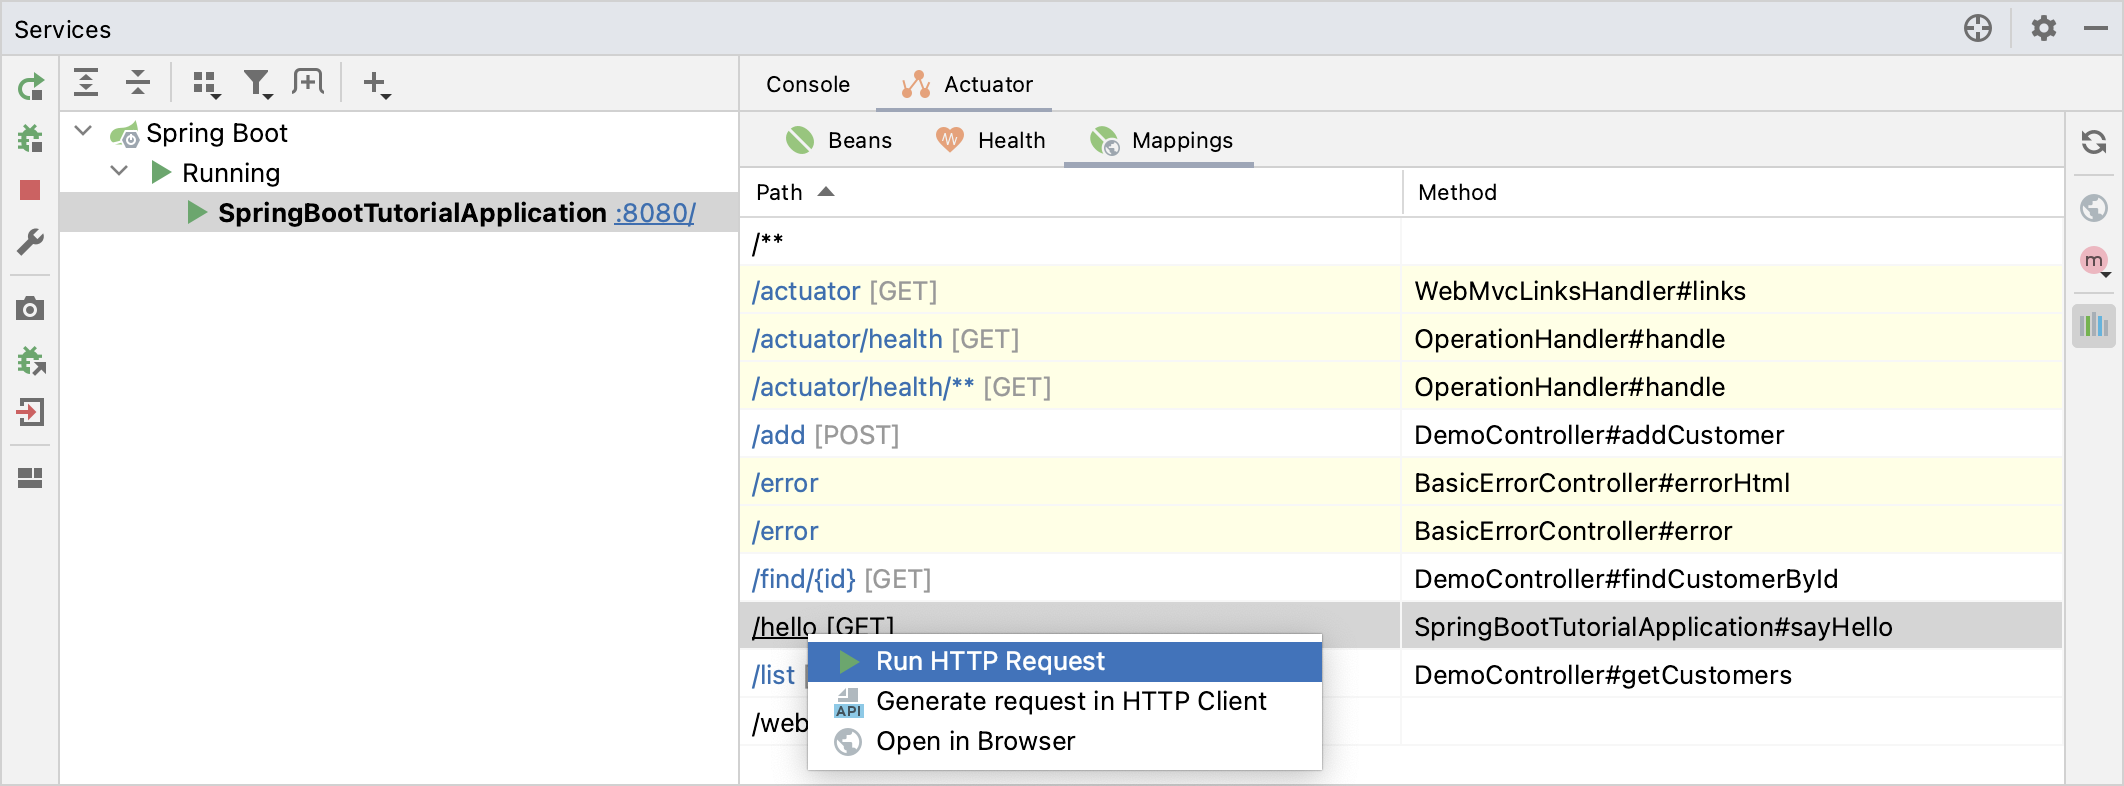 Opening HTTP request mappings from Services tool window